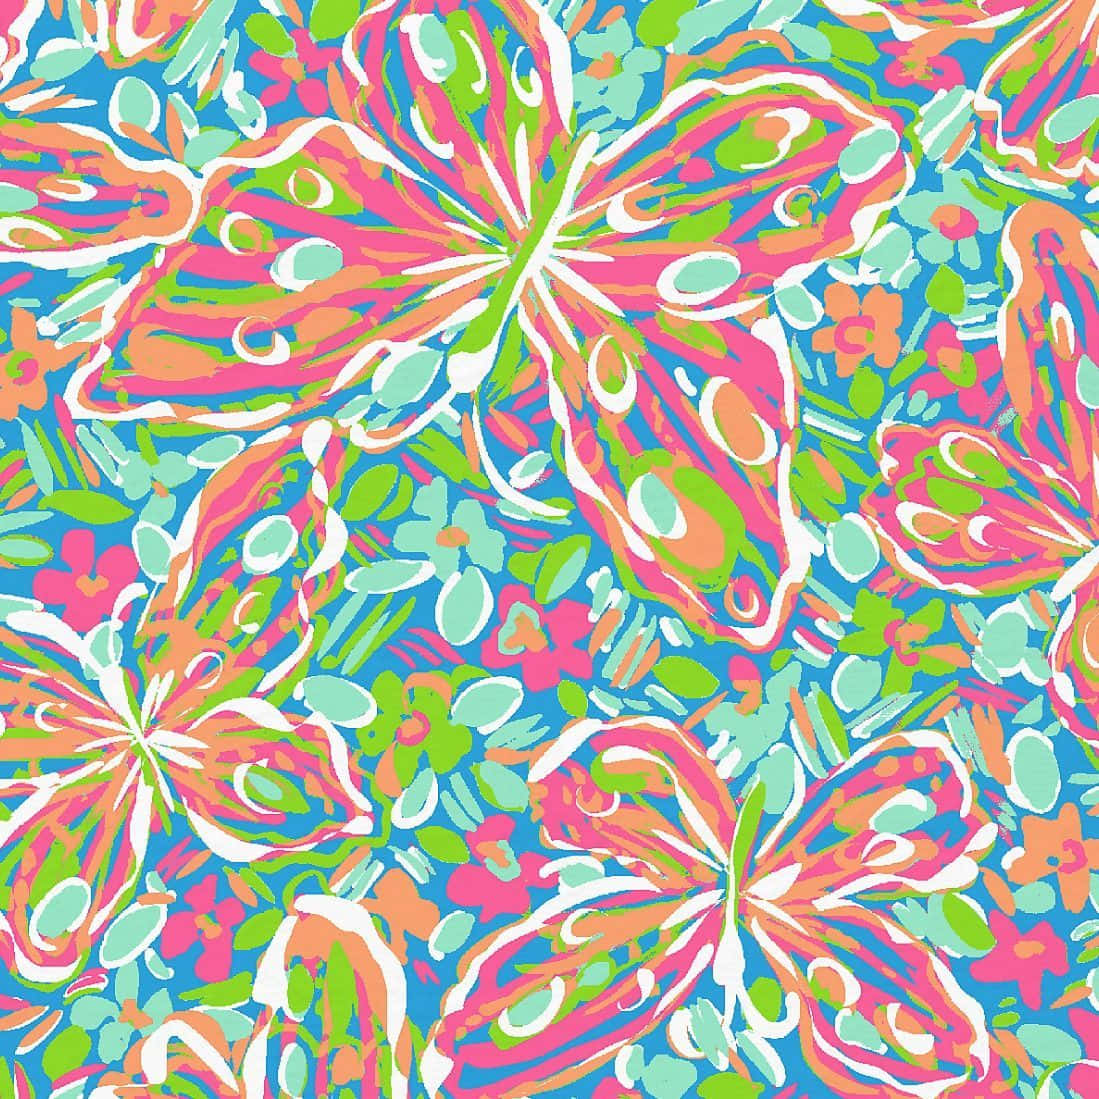 Get ready for summer with a new wardrobe from Lilly Pulitzer!